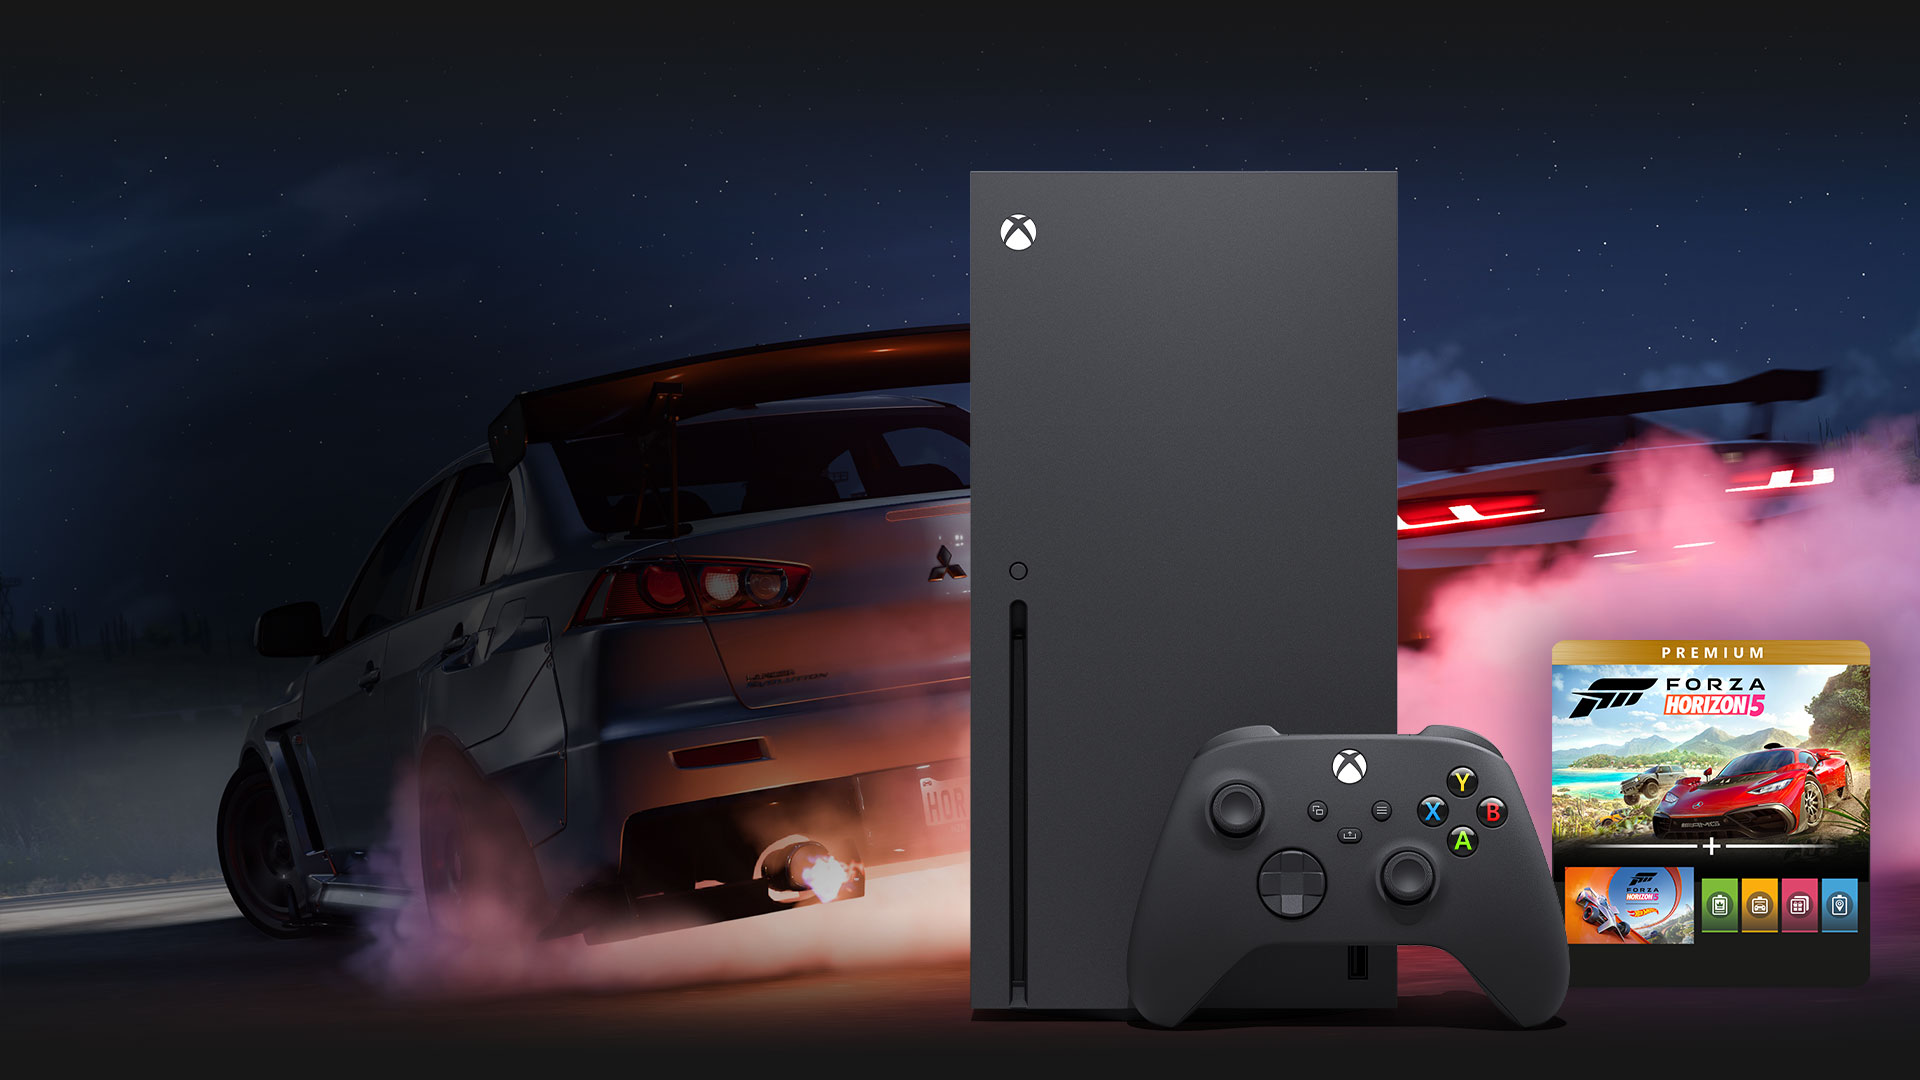 Two cars race behind an Xbox Series X with the Forza Horizon 5 Premium Edition.